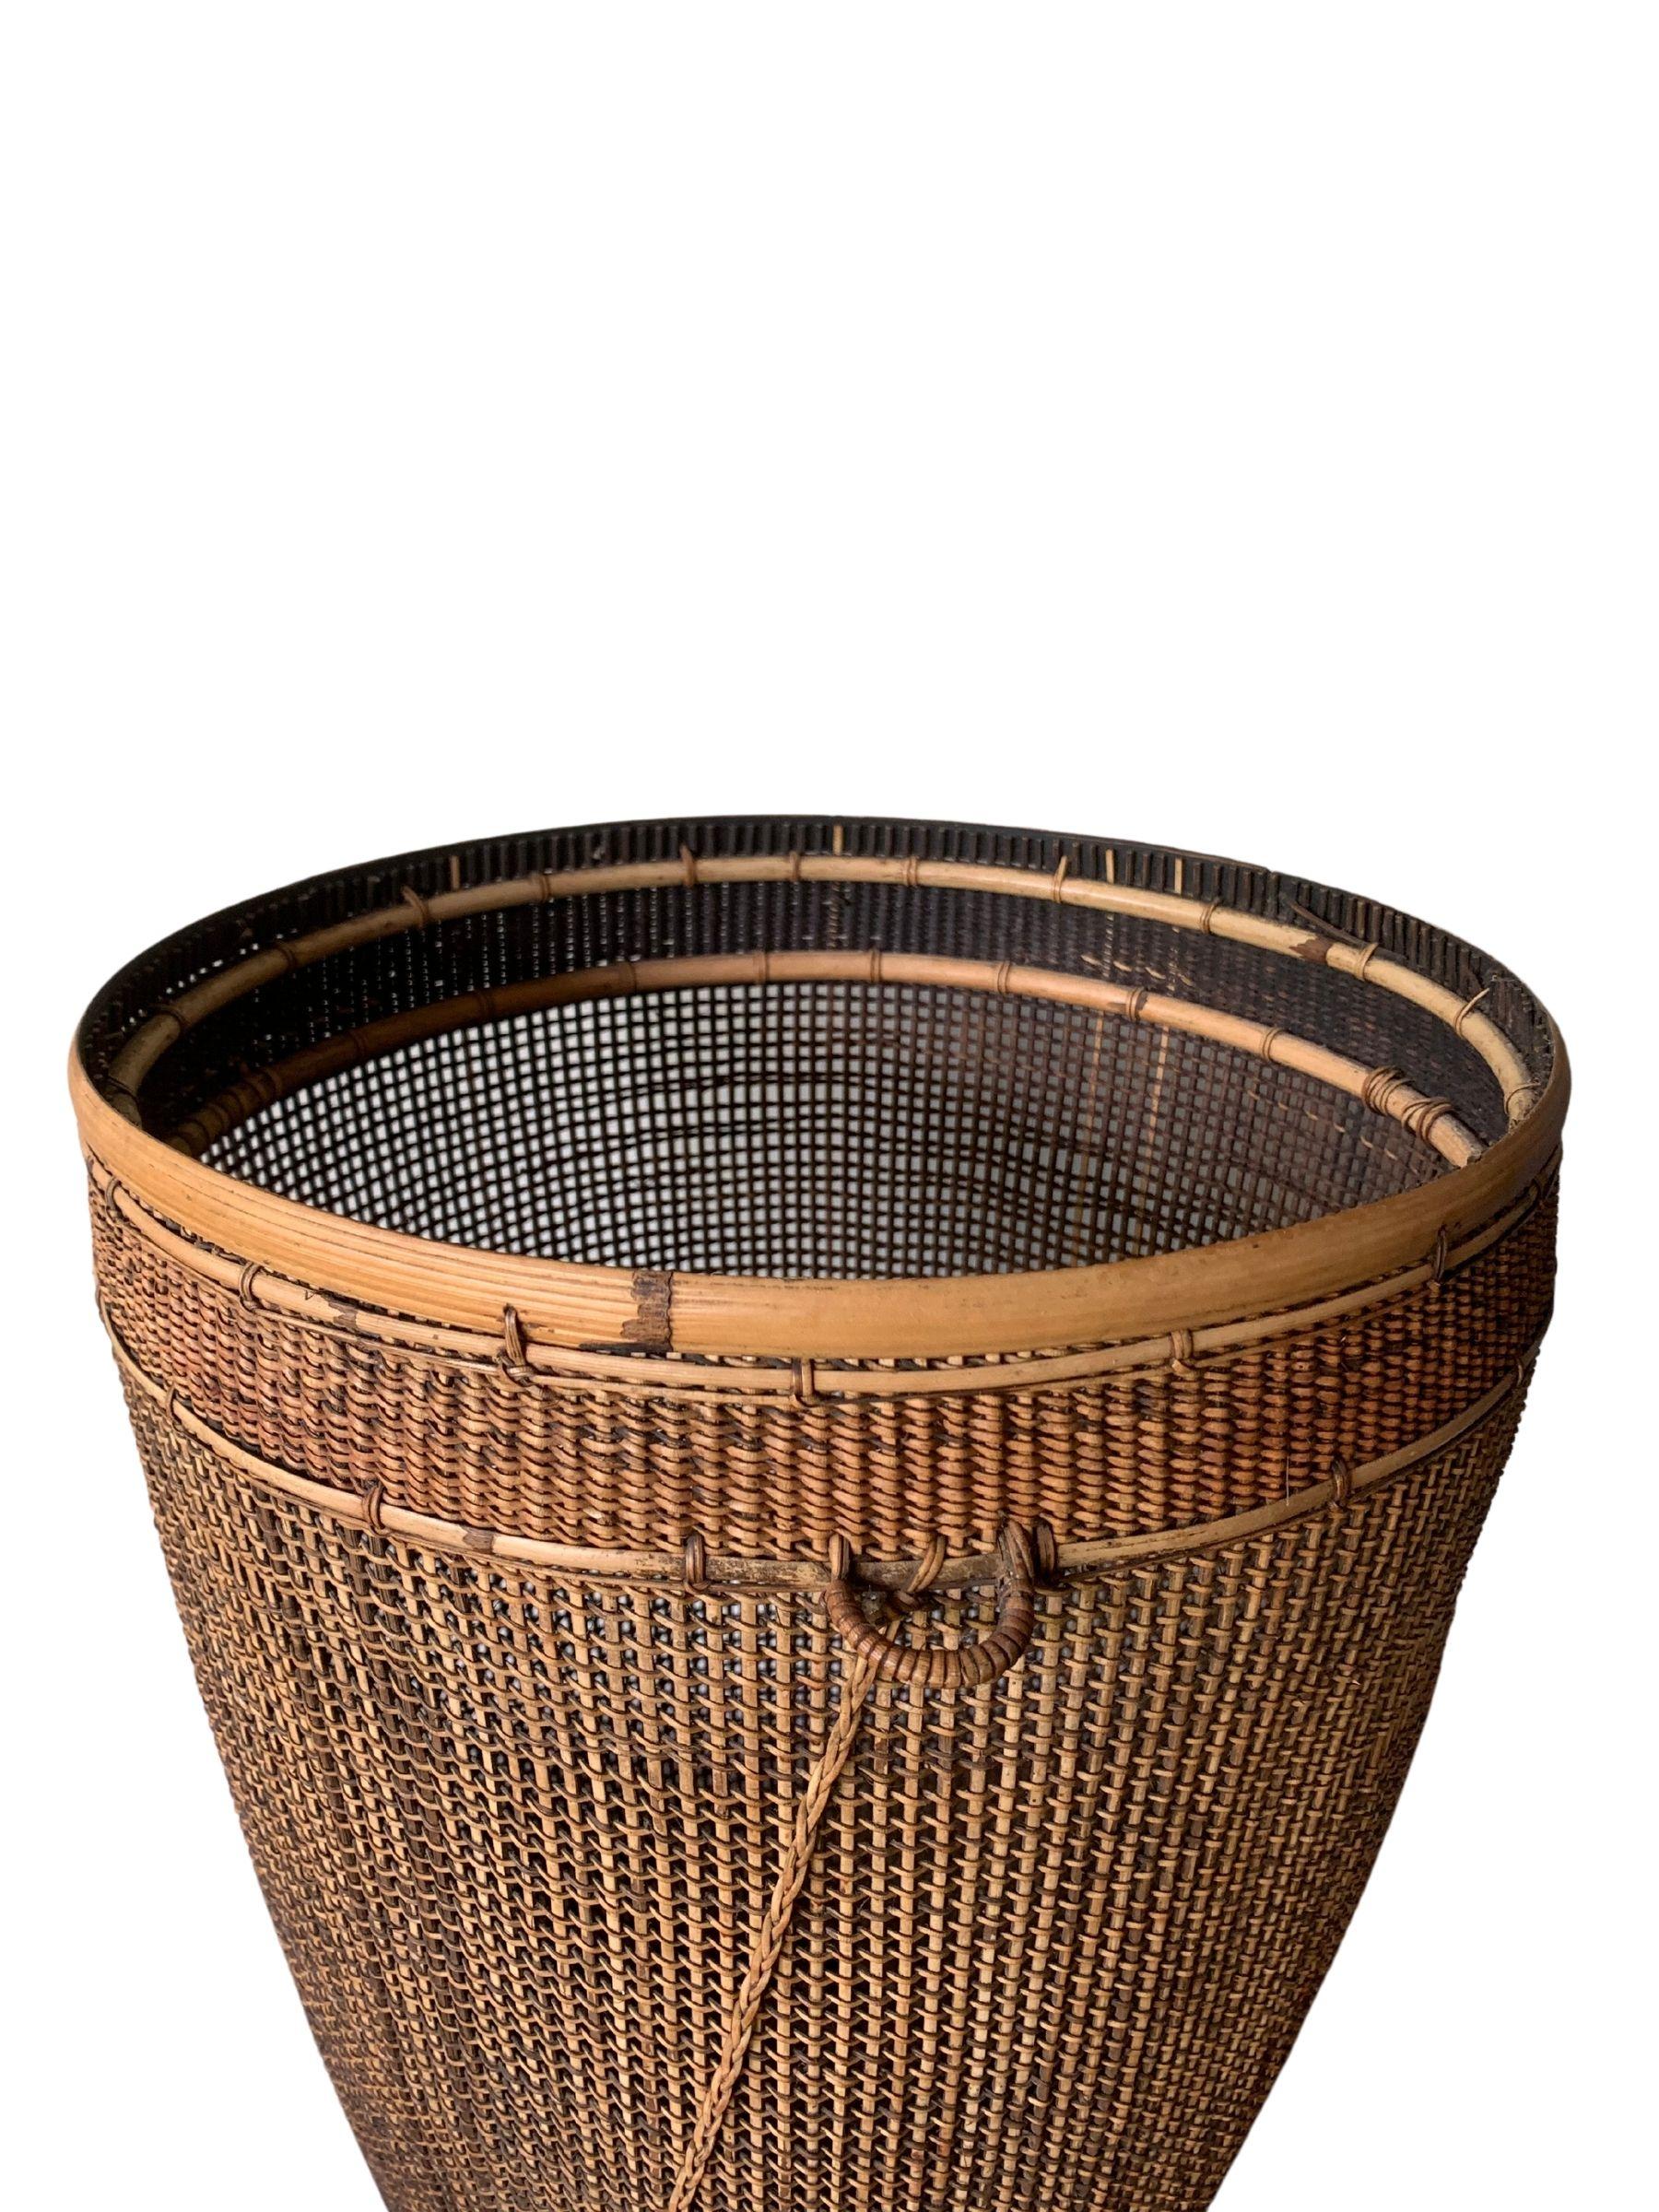 Bamboo & Rattan Basket from Dayak Tribe, Hand-Crafted Borneo, Indonesia, c. 1950 For Sale 2